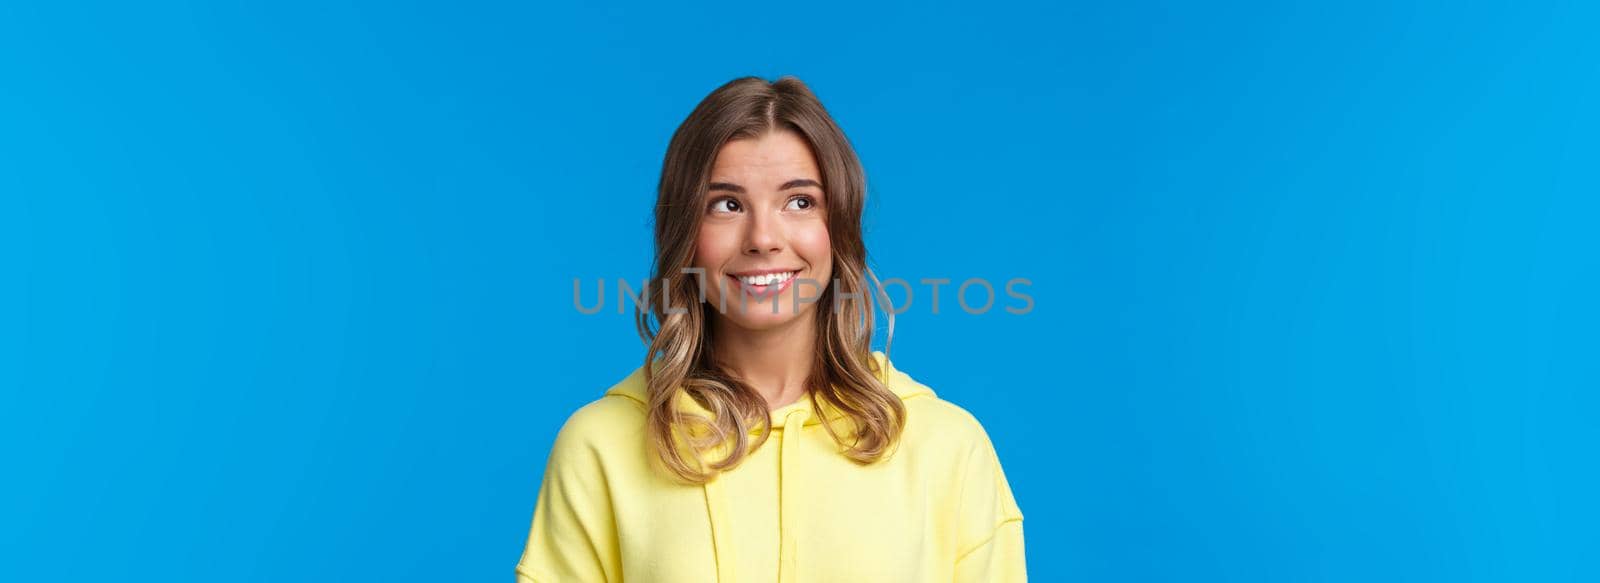 Close-up portrait of attractive european blond female with short hair, wear yellow hoodie, looking dreamy and silly upper left corner, smiling with white beaming smile, standing blue background.